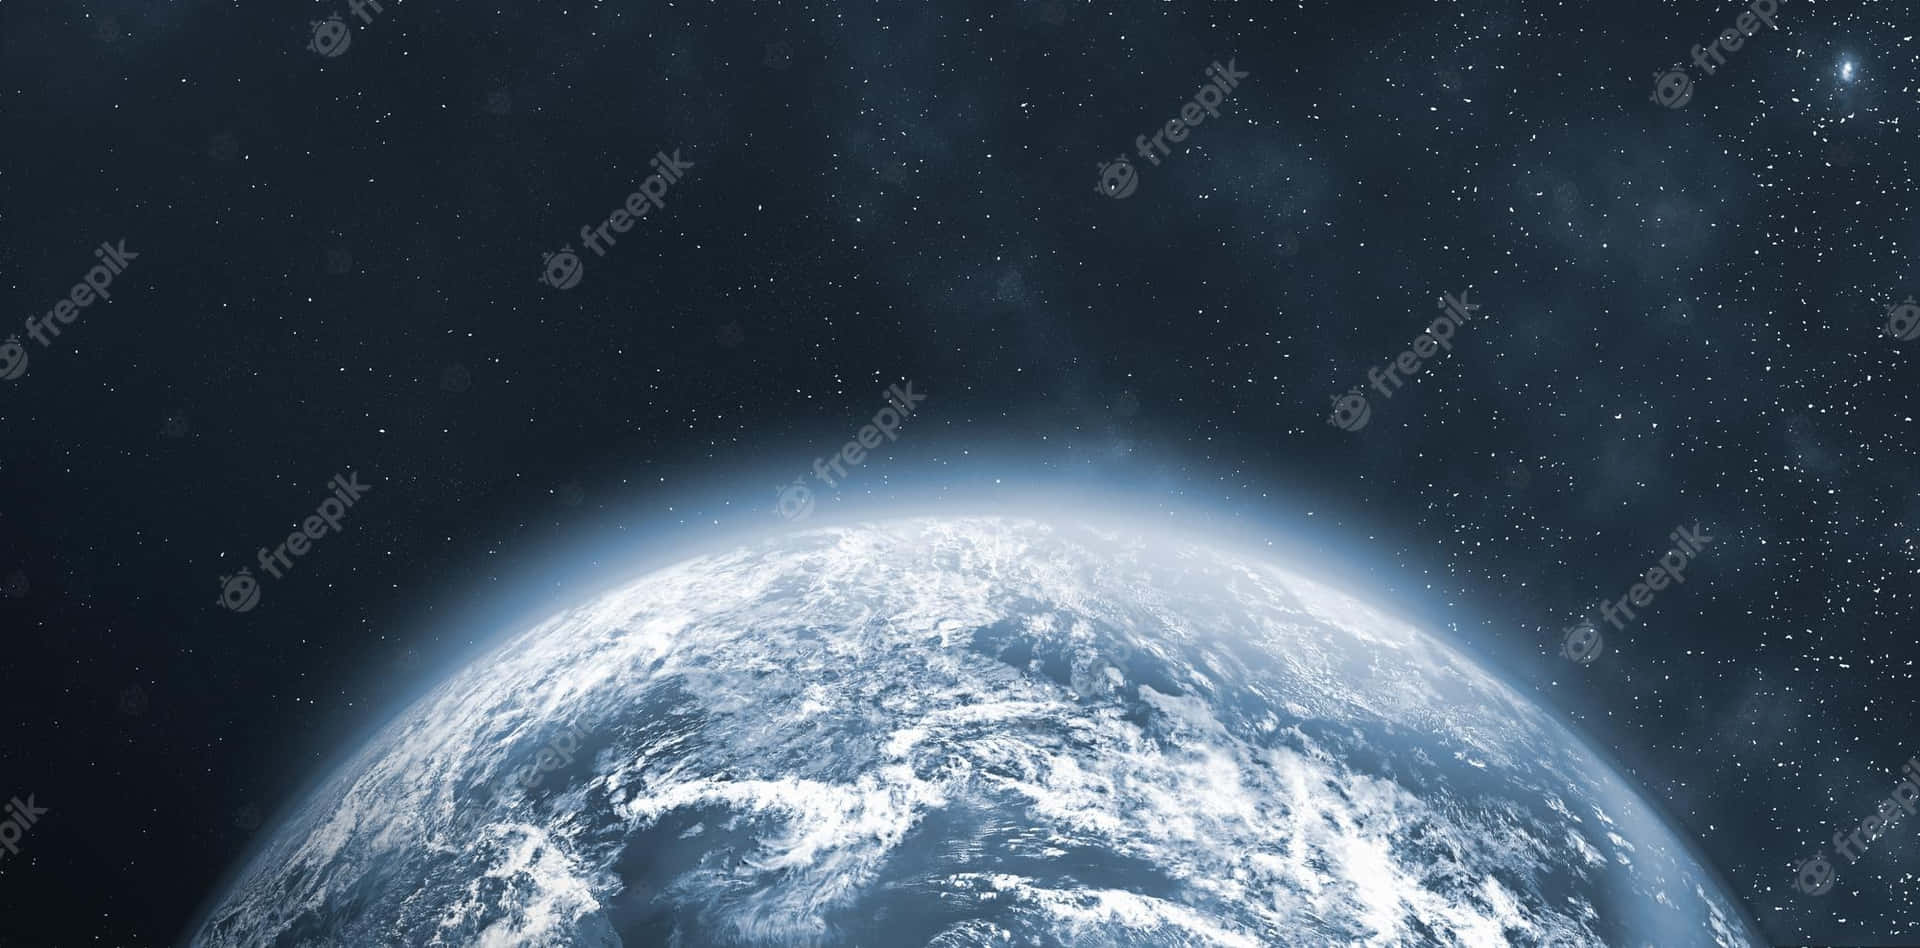 "The Earth from Outer Space" Wallpaper